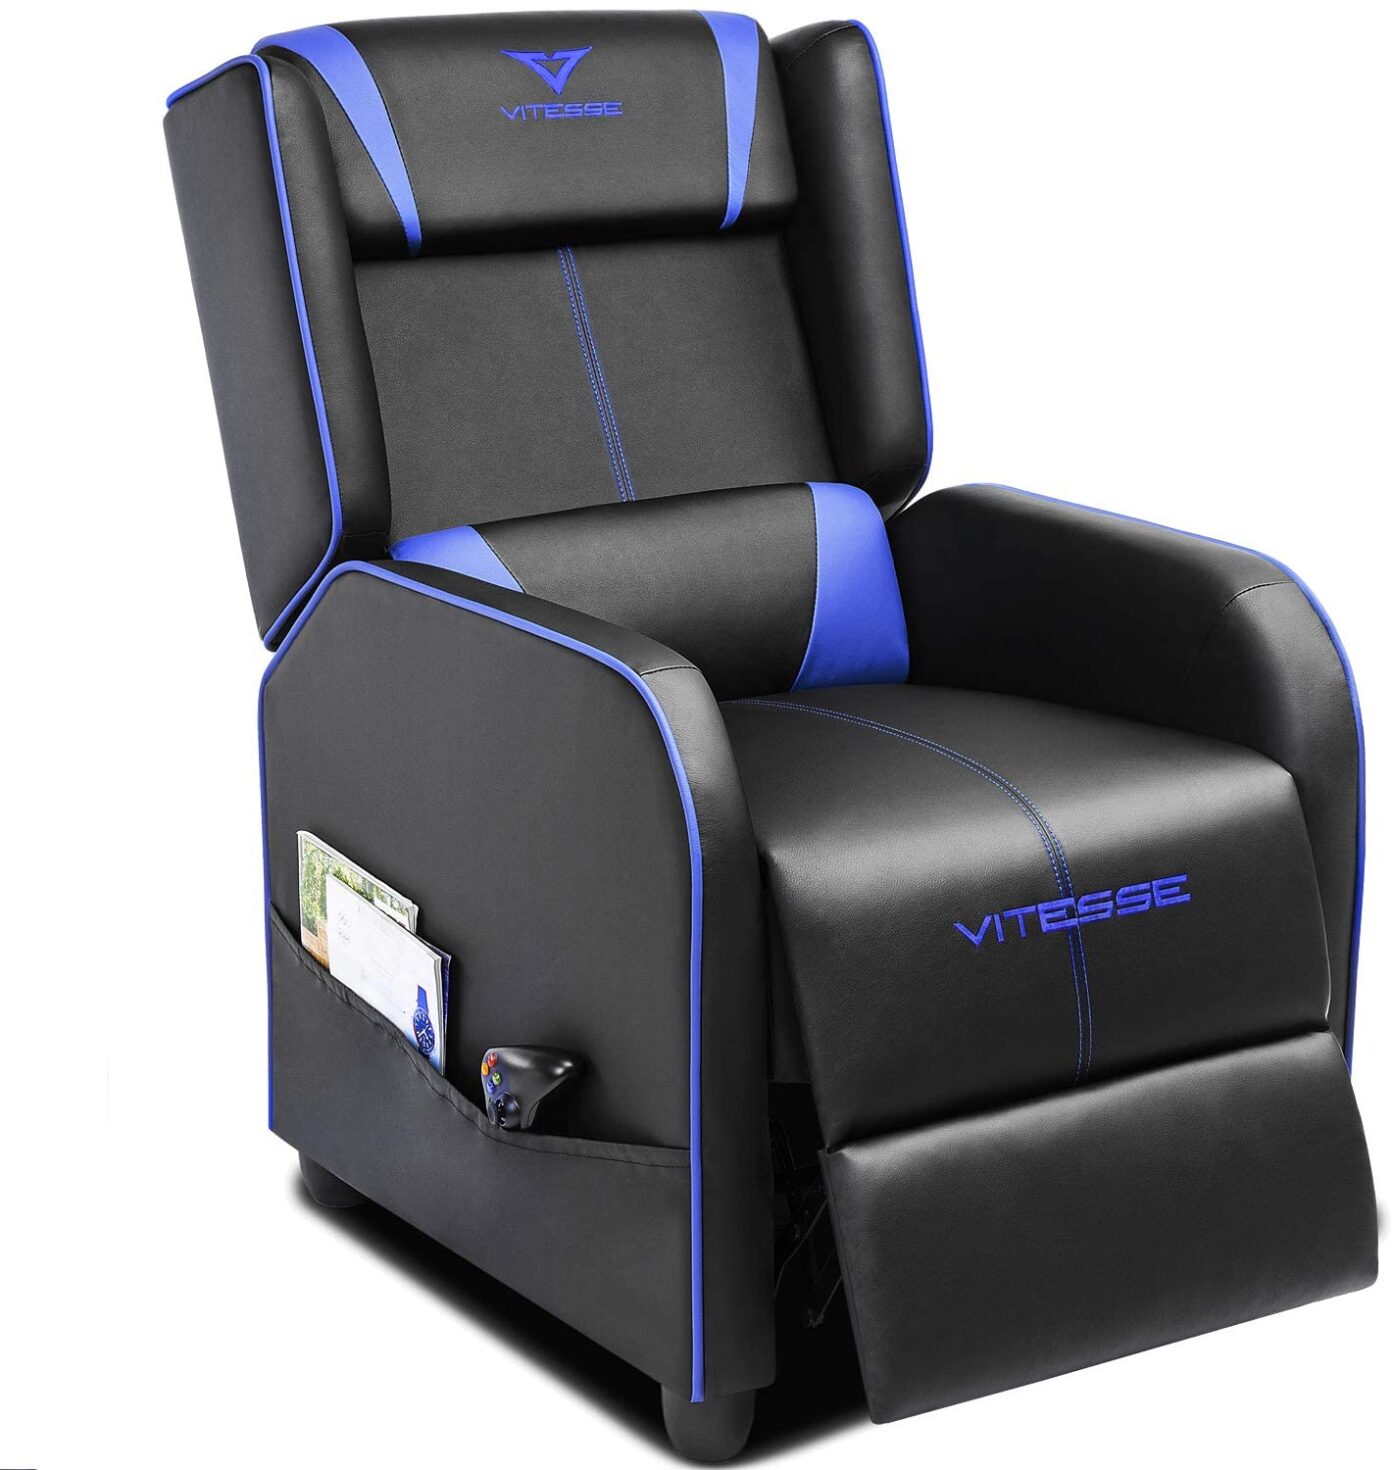 20 Best Console Gaming Chairs You May Buy in 2022